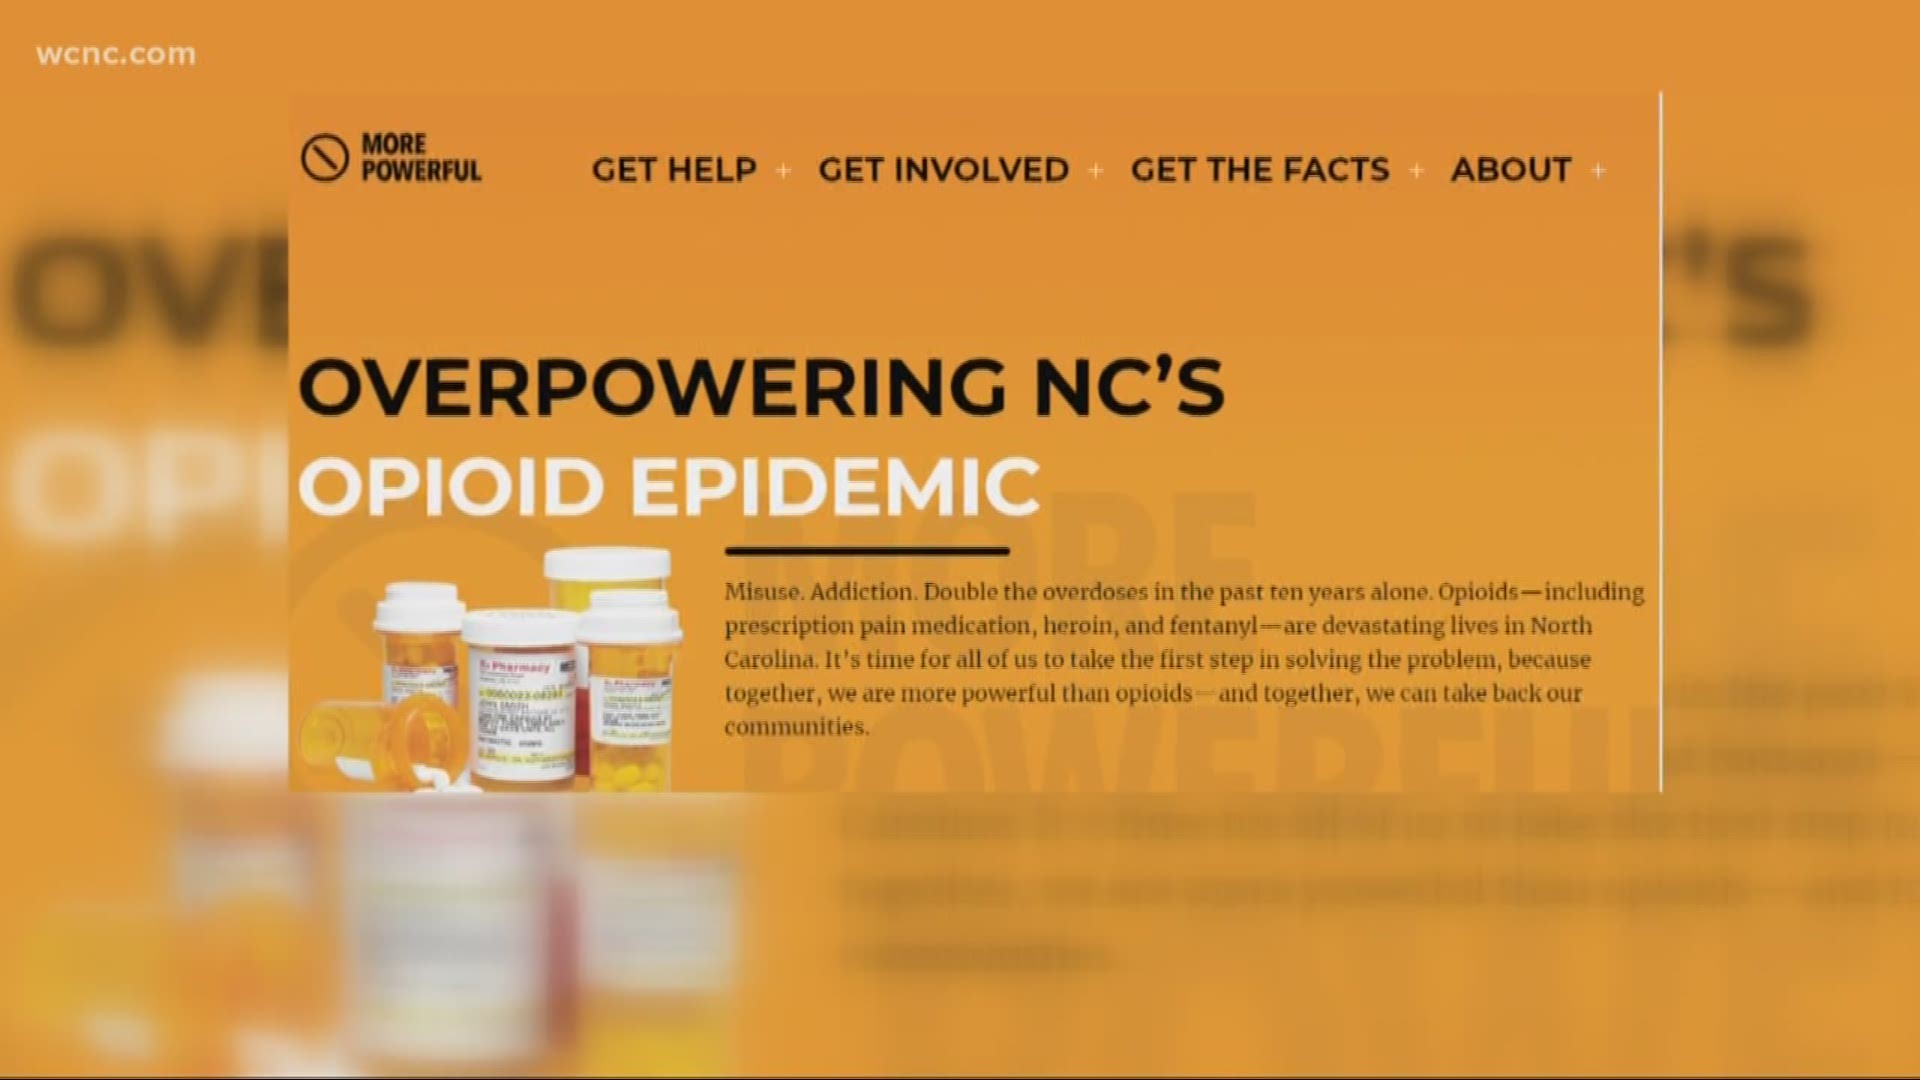 North Carolina Attorney General, John Stein launched MorePowerfulNC.org in hopes the campaign will help empower people to prevent and fight against addiction in their own communities.